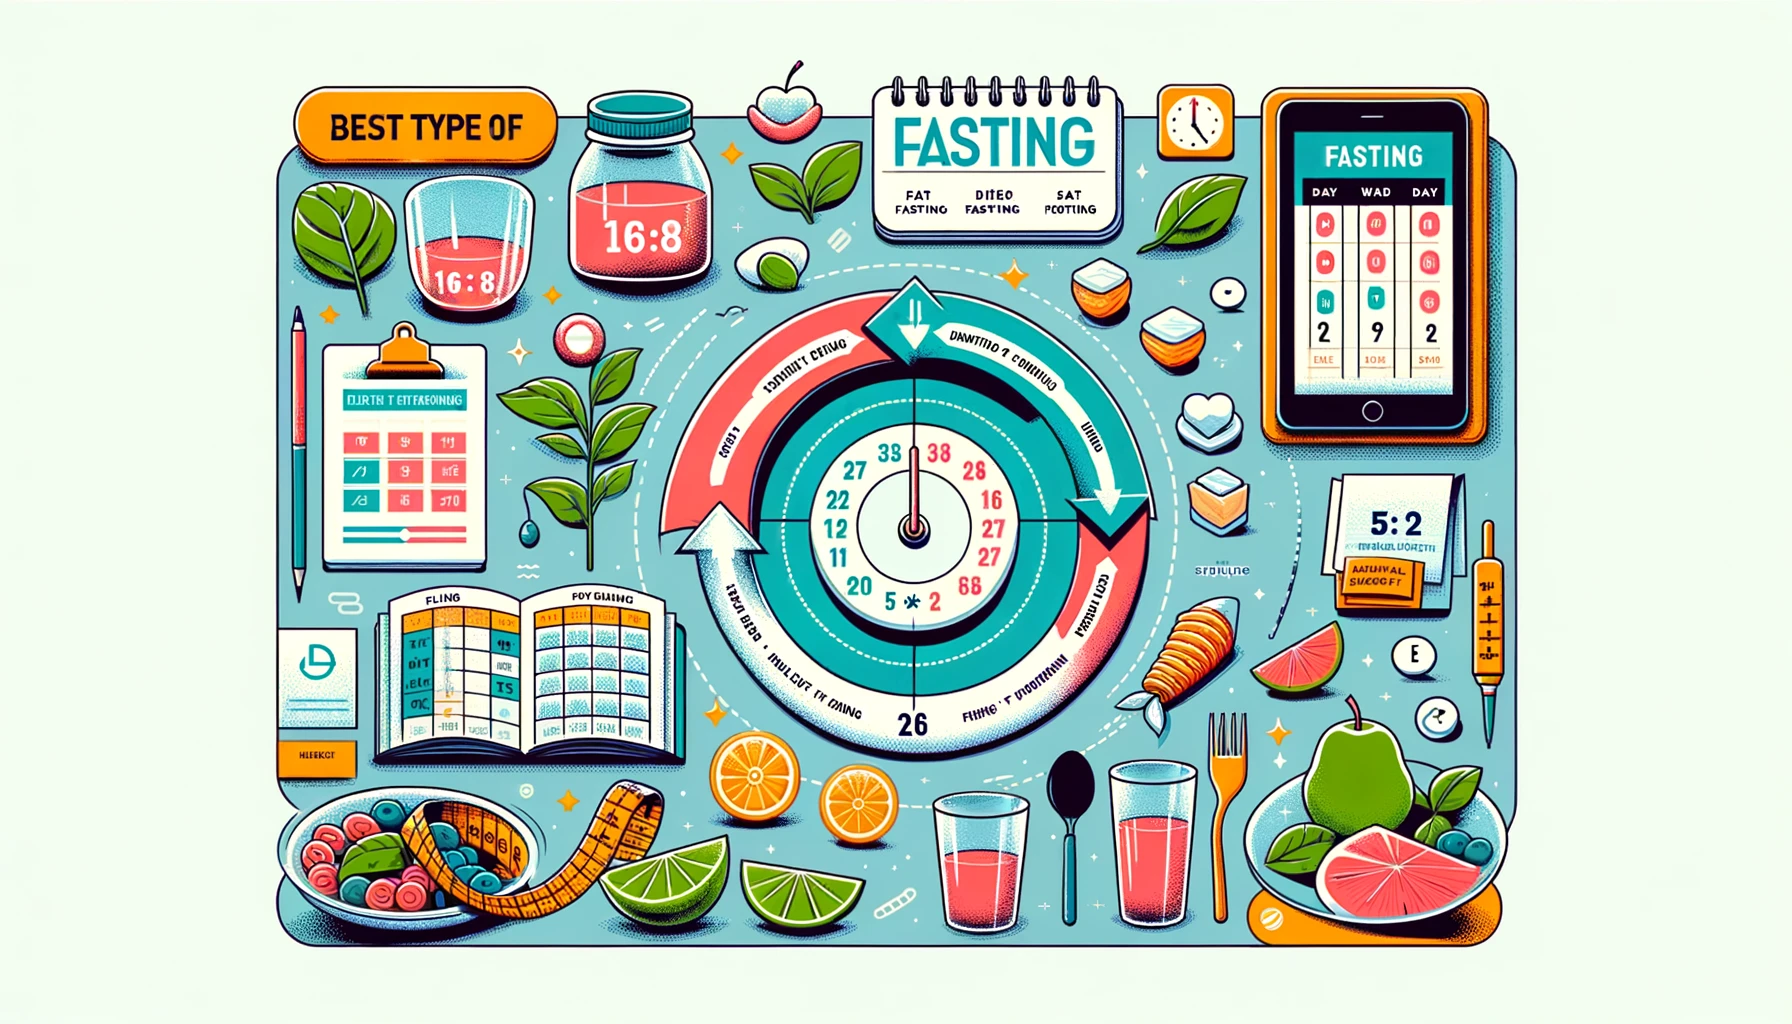 Comparison of 16:8 and 5:2 fasting diets, showing daily eating-fasting cycle and weekly calorie-restricted plan.